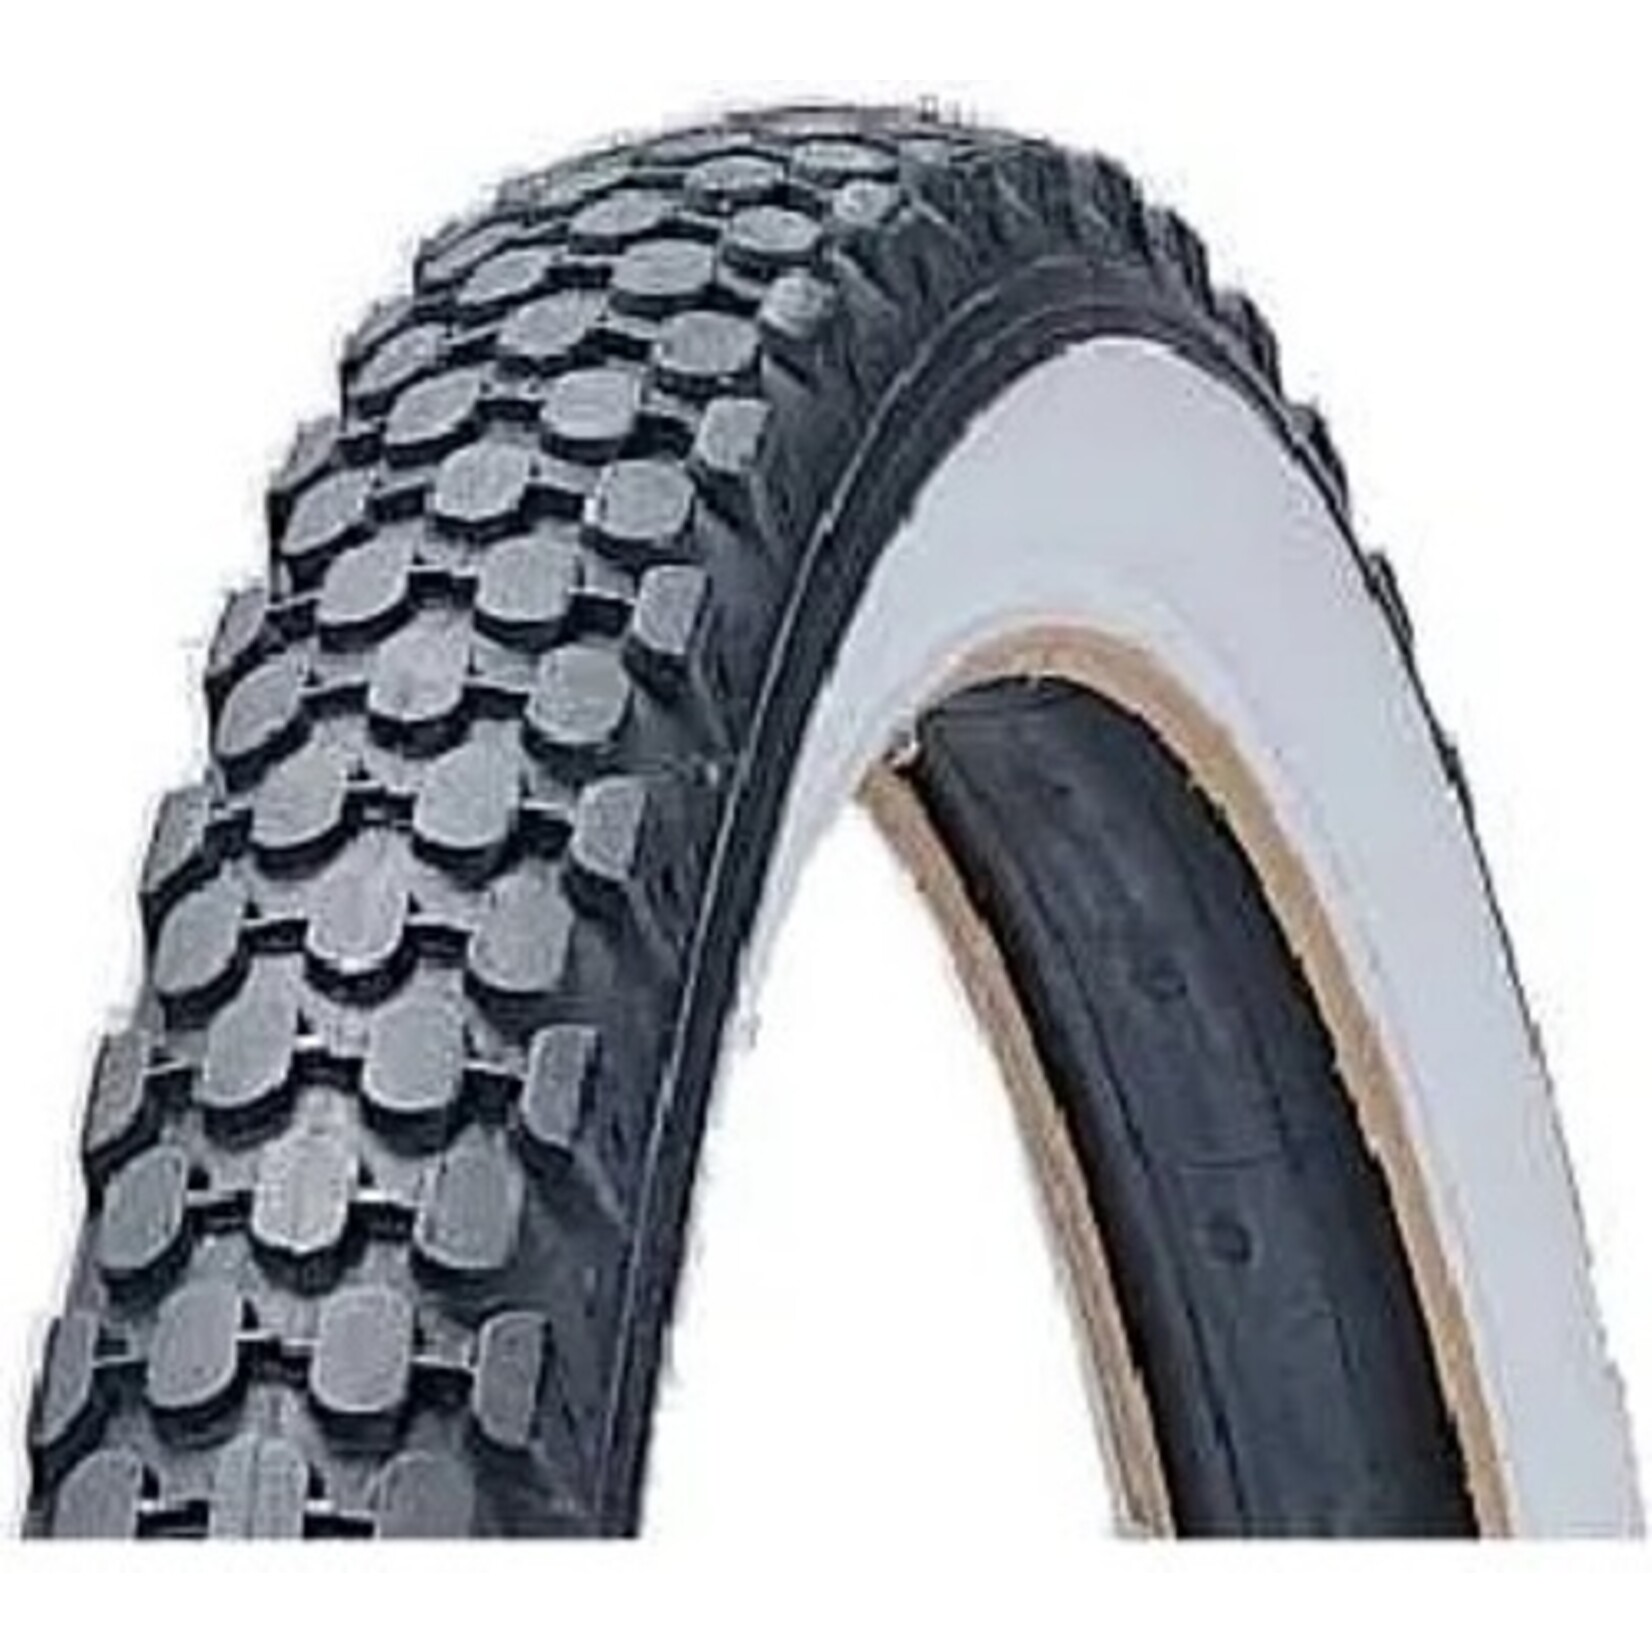 Duro Duro Bicycle Tyre - 26 X 2.125 - Black With White Wall Cruiser - Pair